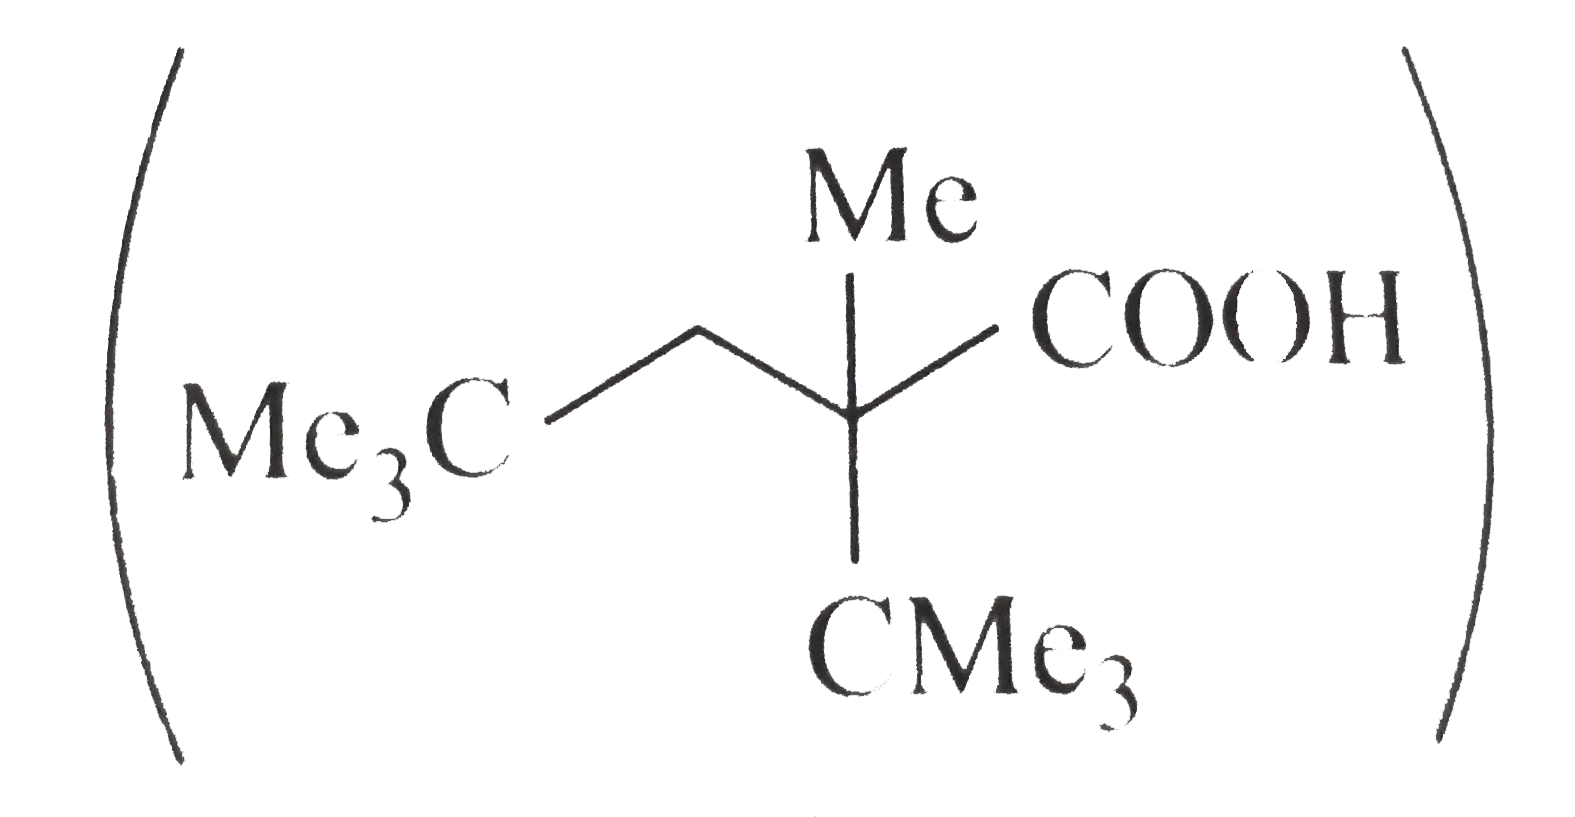 Explain the following :   (a) Highly branched acids such as  are less acidic than unbranched acids.   (b) K(a1) for maleic acid is greater than that for fumaric acid or pK(a1) for maleic acid is less than that for fumaric acid.   ( c) K(a2) for fumaric acid is greater than that for maleic acid or pK(a2) for fumaric acid is less than that for maleic acid.   (d) Phthalic acid is a stronger acid than either isophthalic or terephthalic acids but phthalate monoanion is weaker than isophthalate and terephthalate monoanions.   ( e) o-Nitro benzoic acid (pKa = 2.21) is stronger acid than 3,5-dinitrobenzoic acid (pKa = 2.80) but weaker than 2,4-dinitro benzene acid in water.